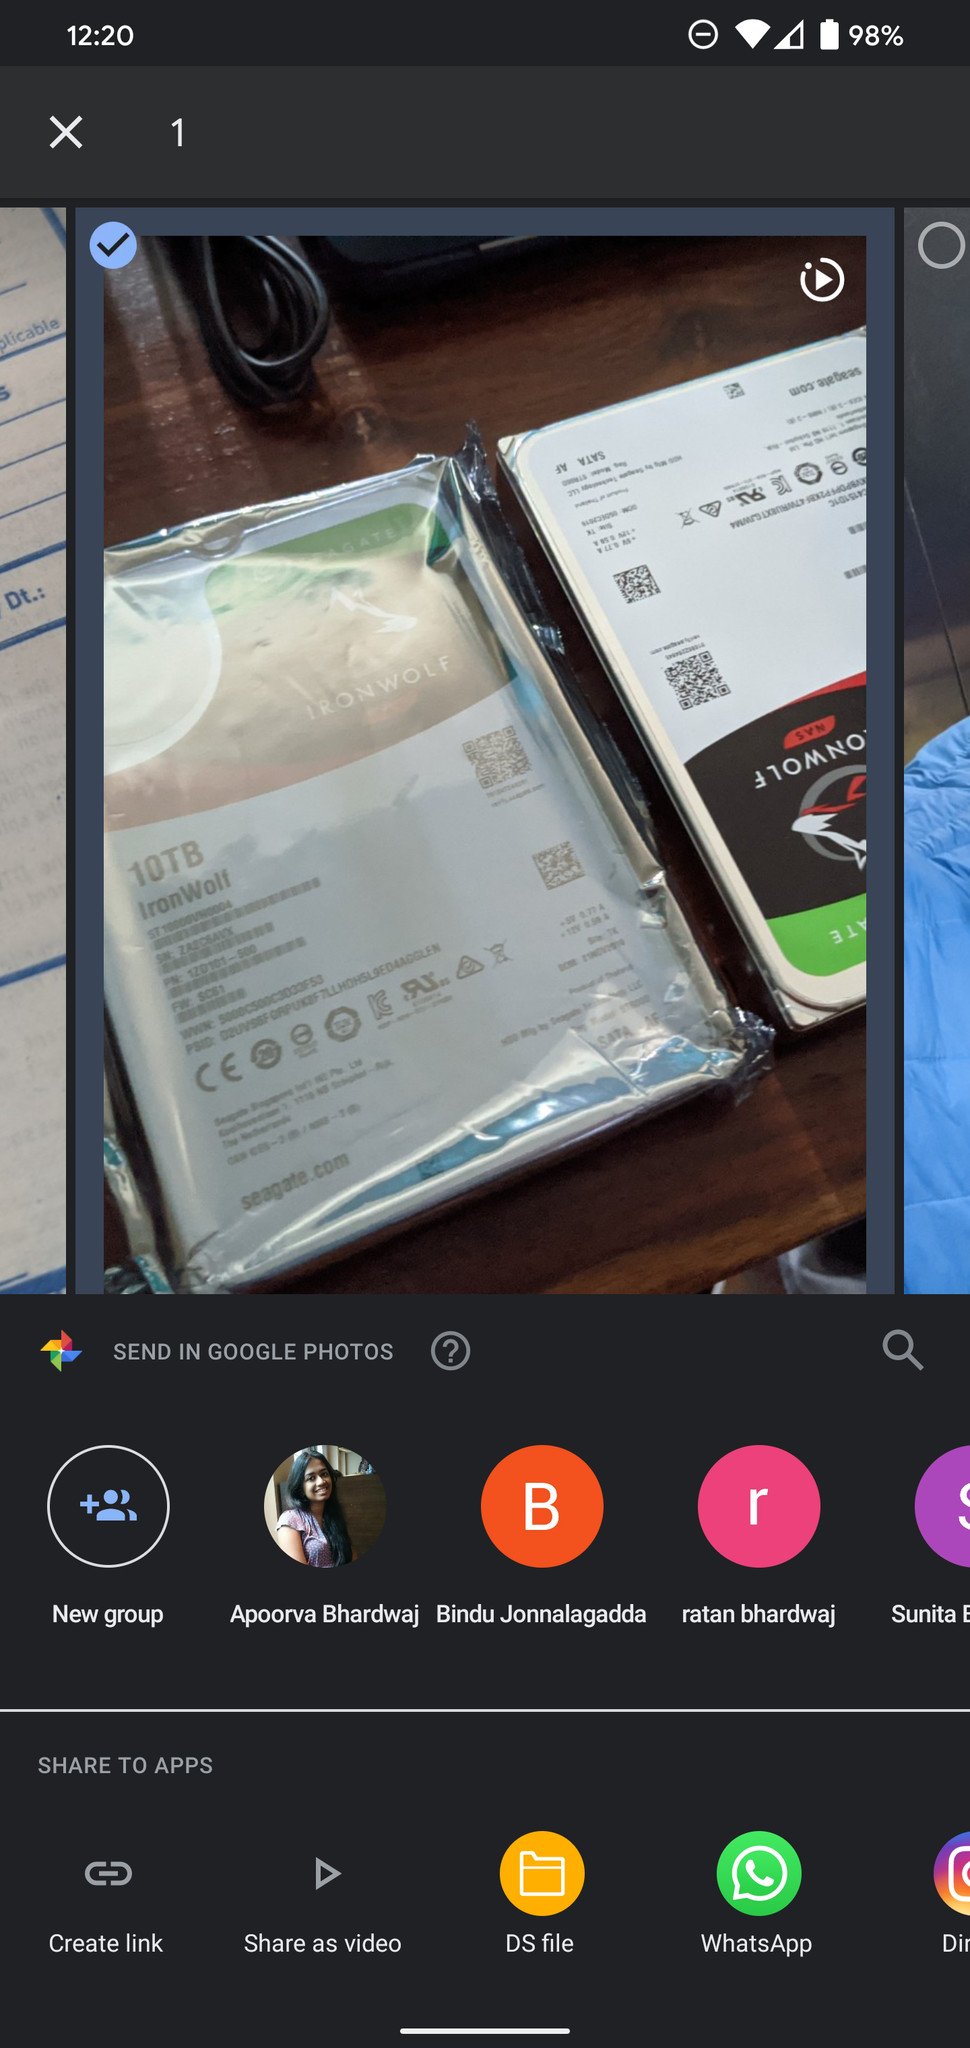 Google Pixel 4 XL Android 10 software